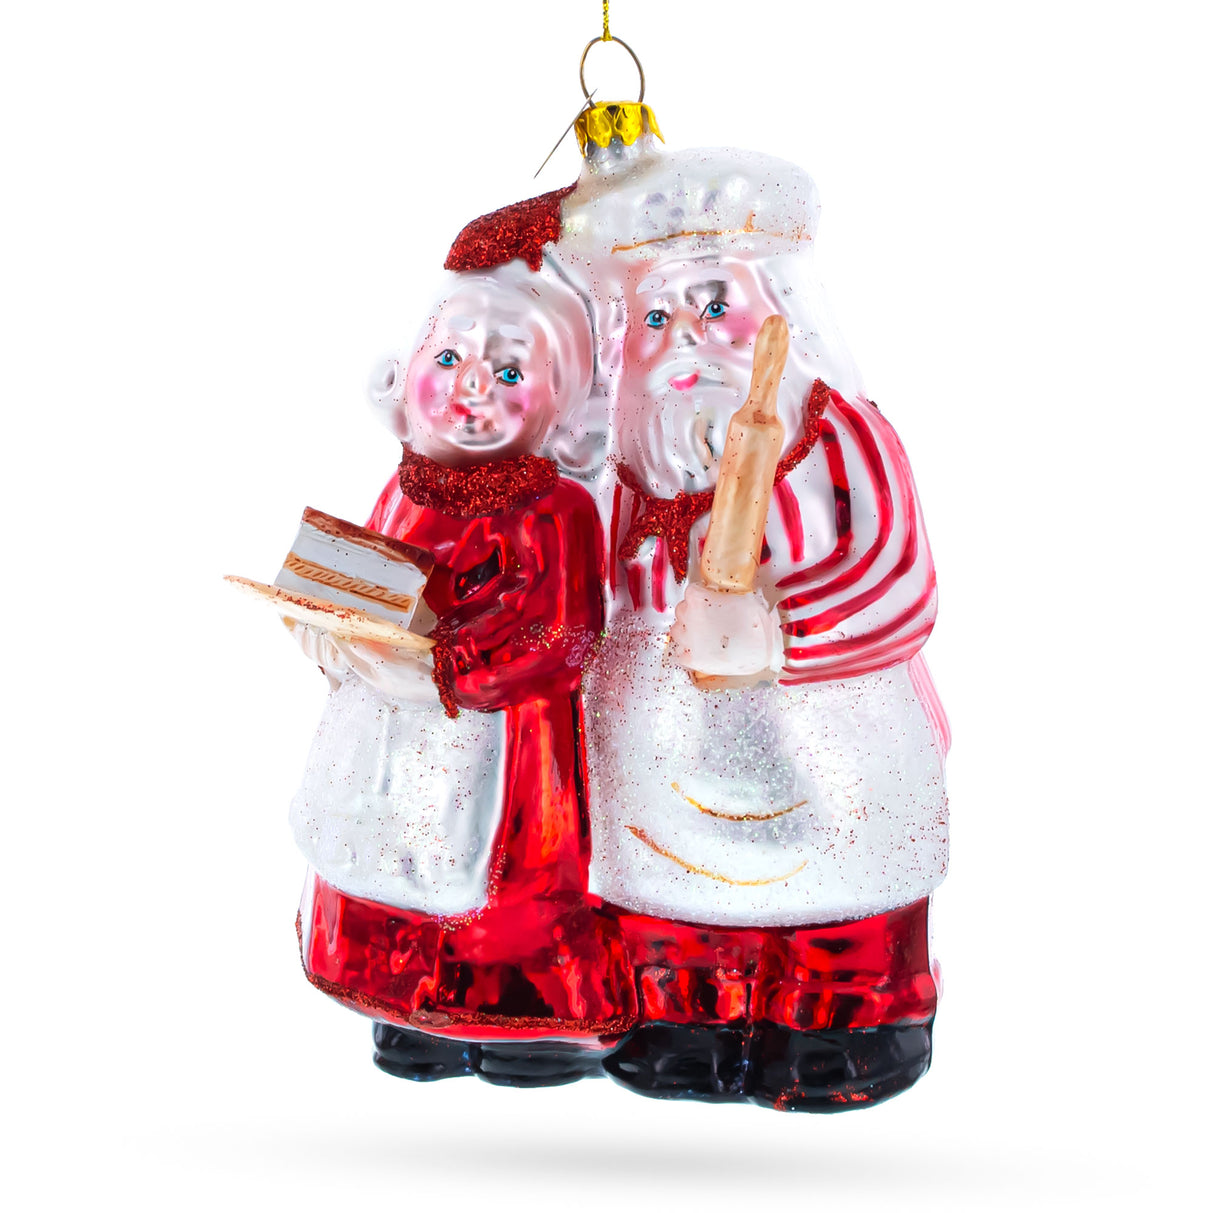 Delightful Mr. and Mrs. Santa Claus Baking Cake - Handcrafted Blown Glass Christmas Ornament in Red color,  shape